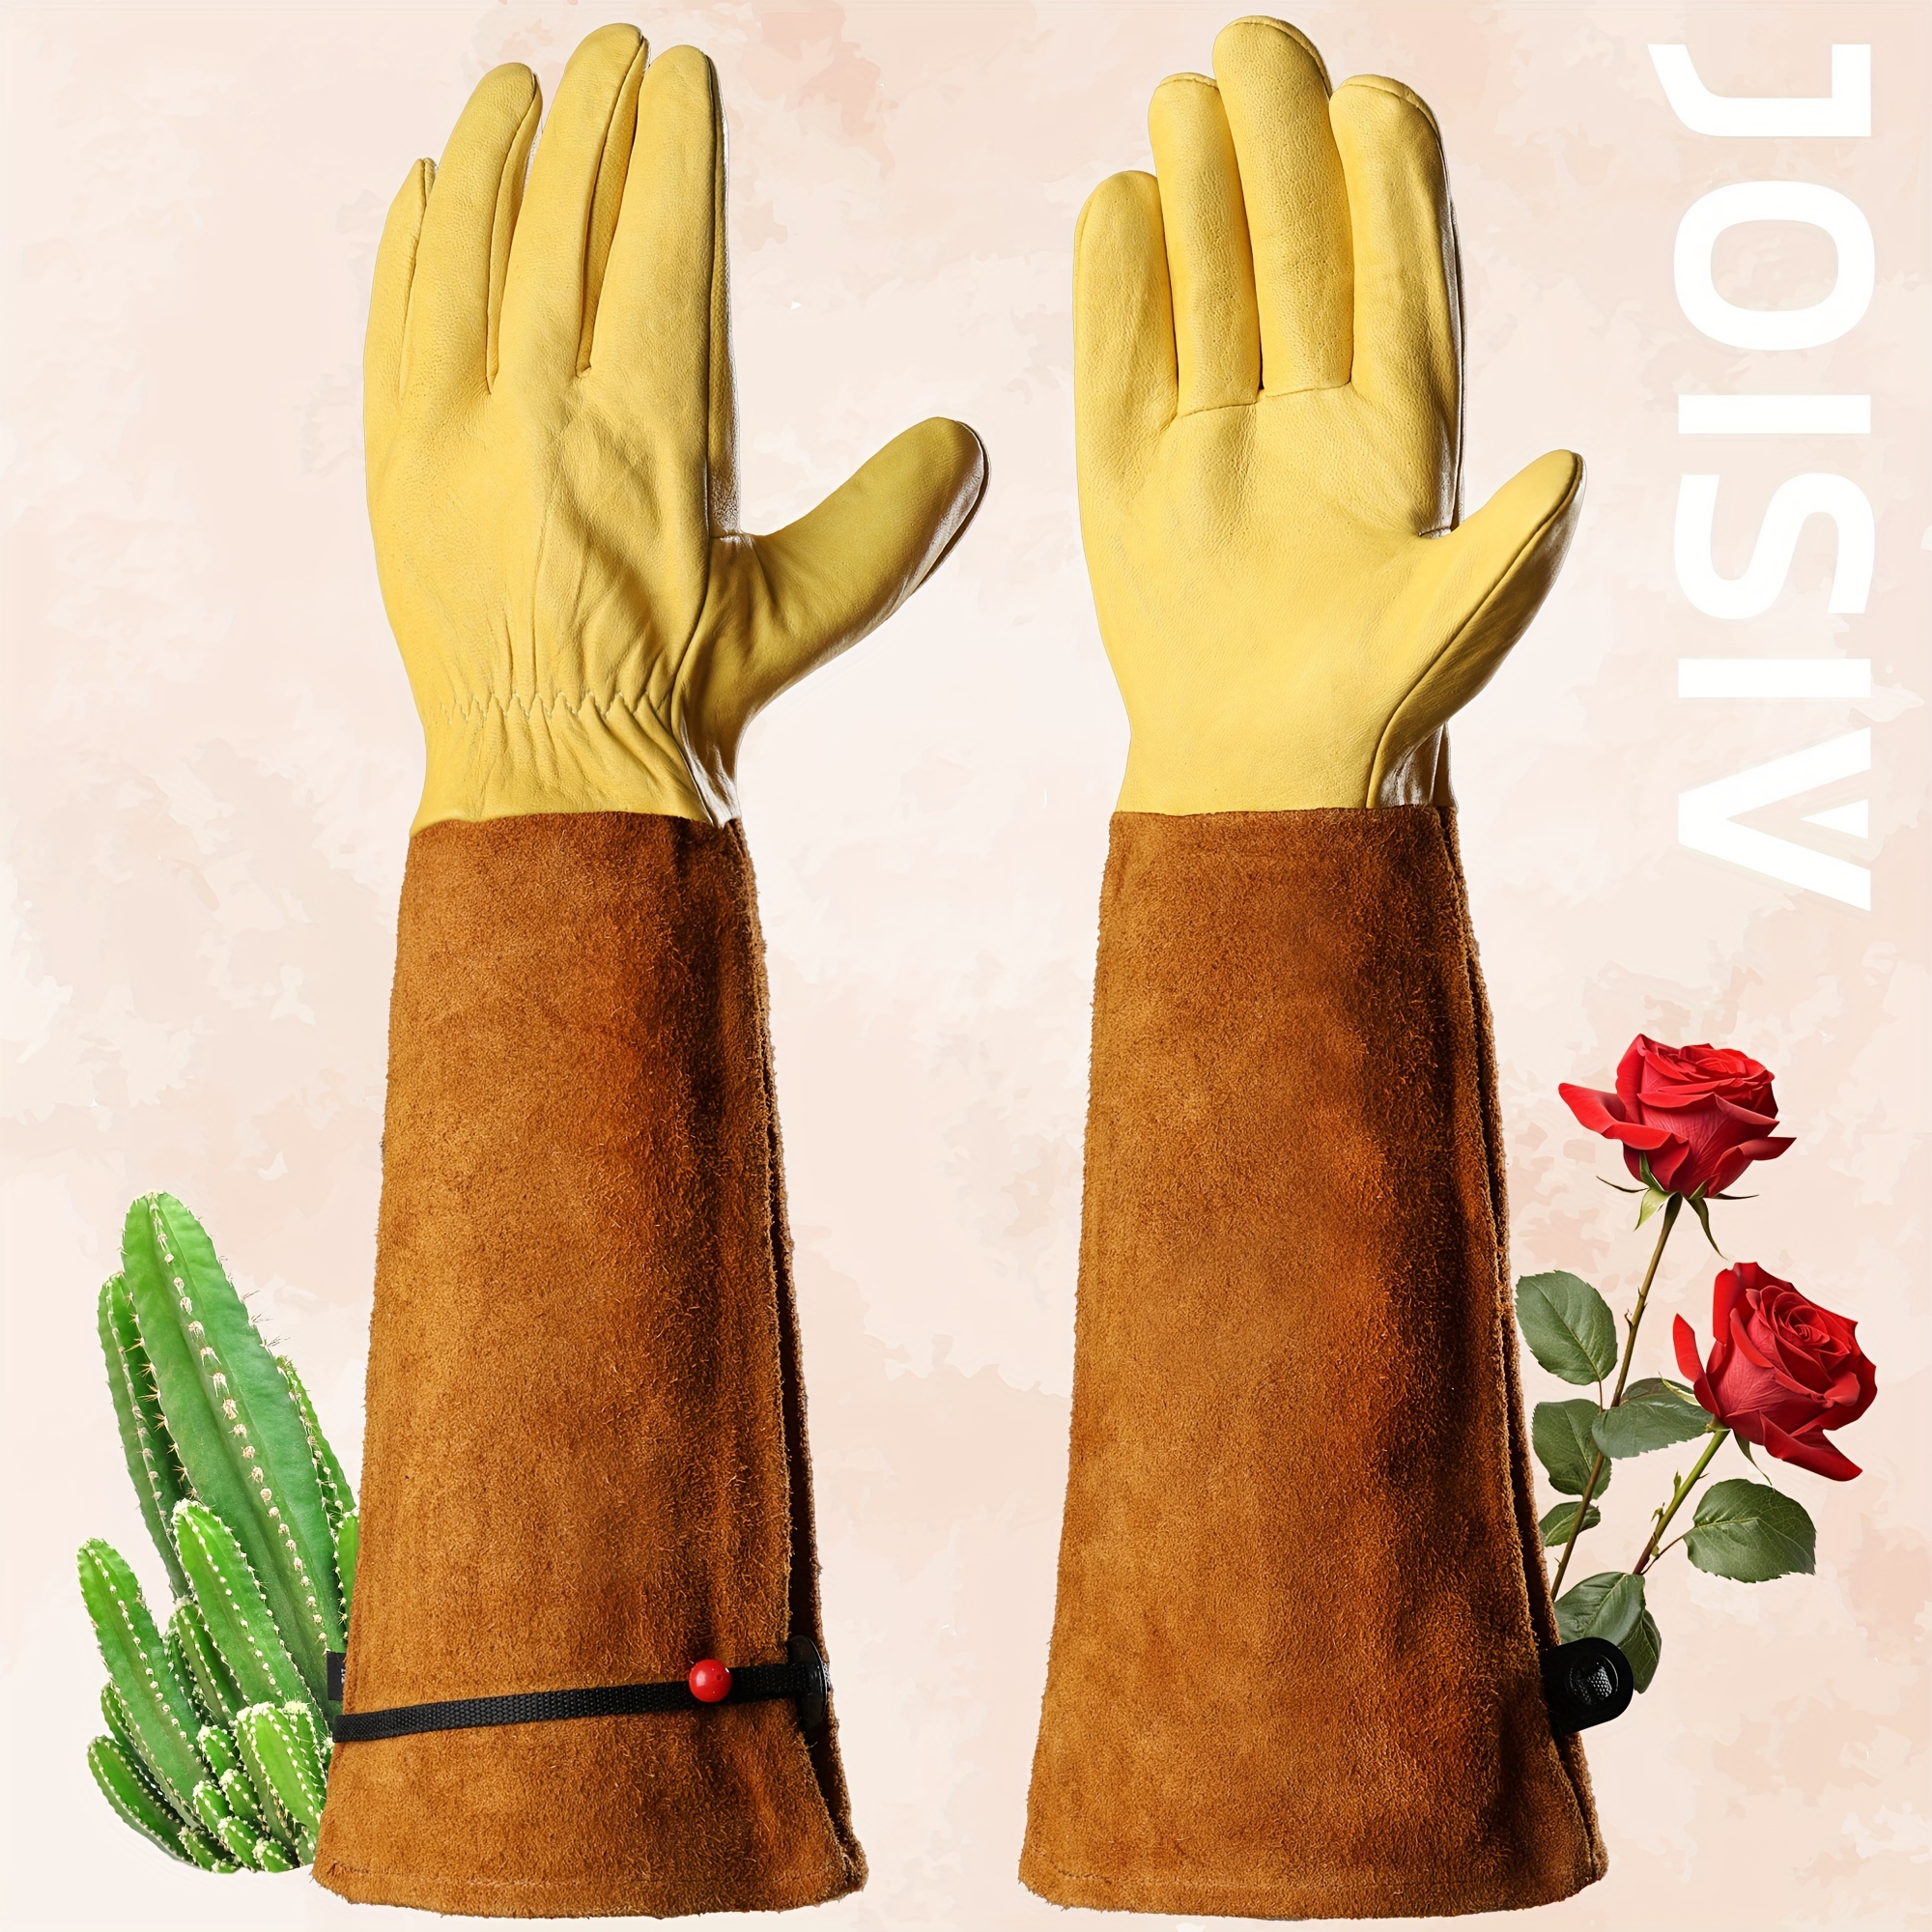 

Joisiv Professional Gardening Gloves - Thorn-proof, Breathable Cowhide With Adjustable Cuff For Men & Women | Ideal For Rose Pruning & Yard Work